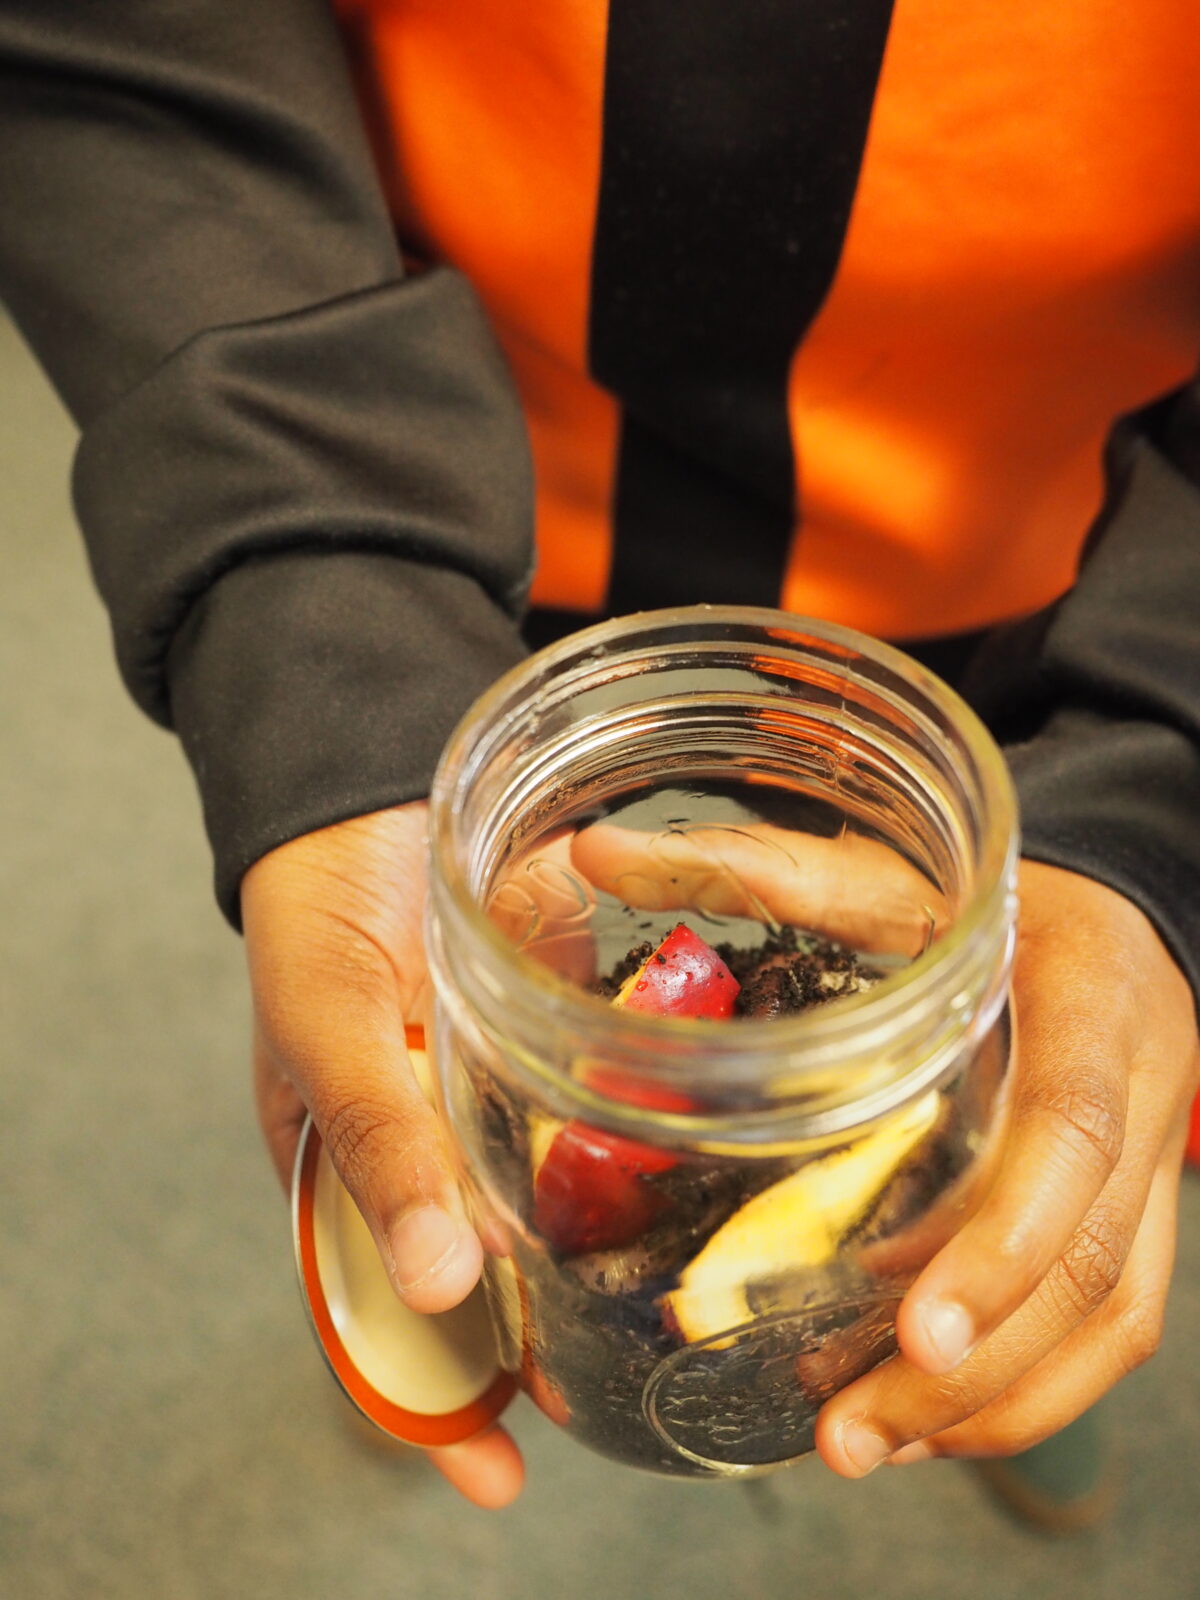 A close-up showing a student's hands holding a small mason jar that is used as a decomposition jar experiment, you can see fresh apple slices and soil inside 